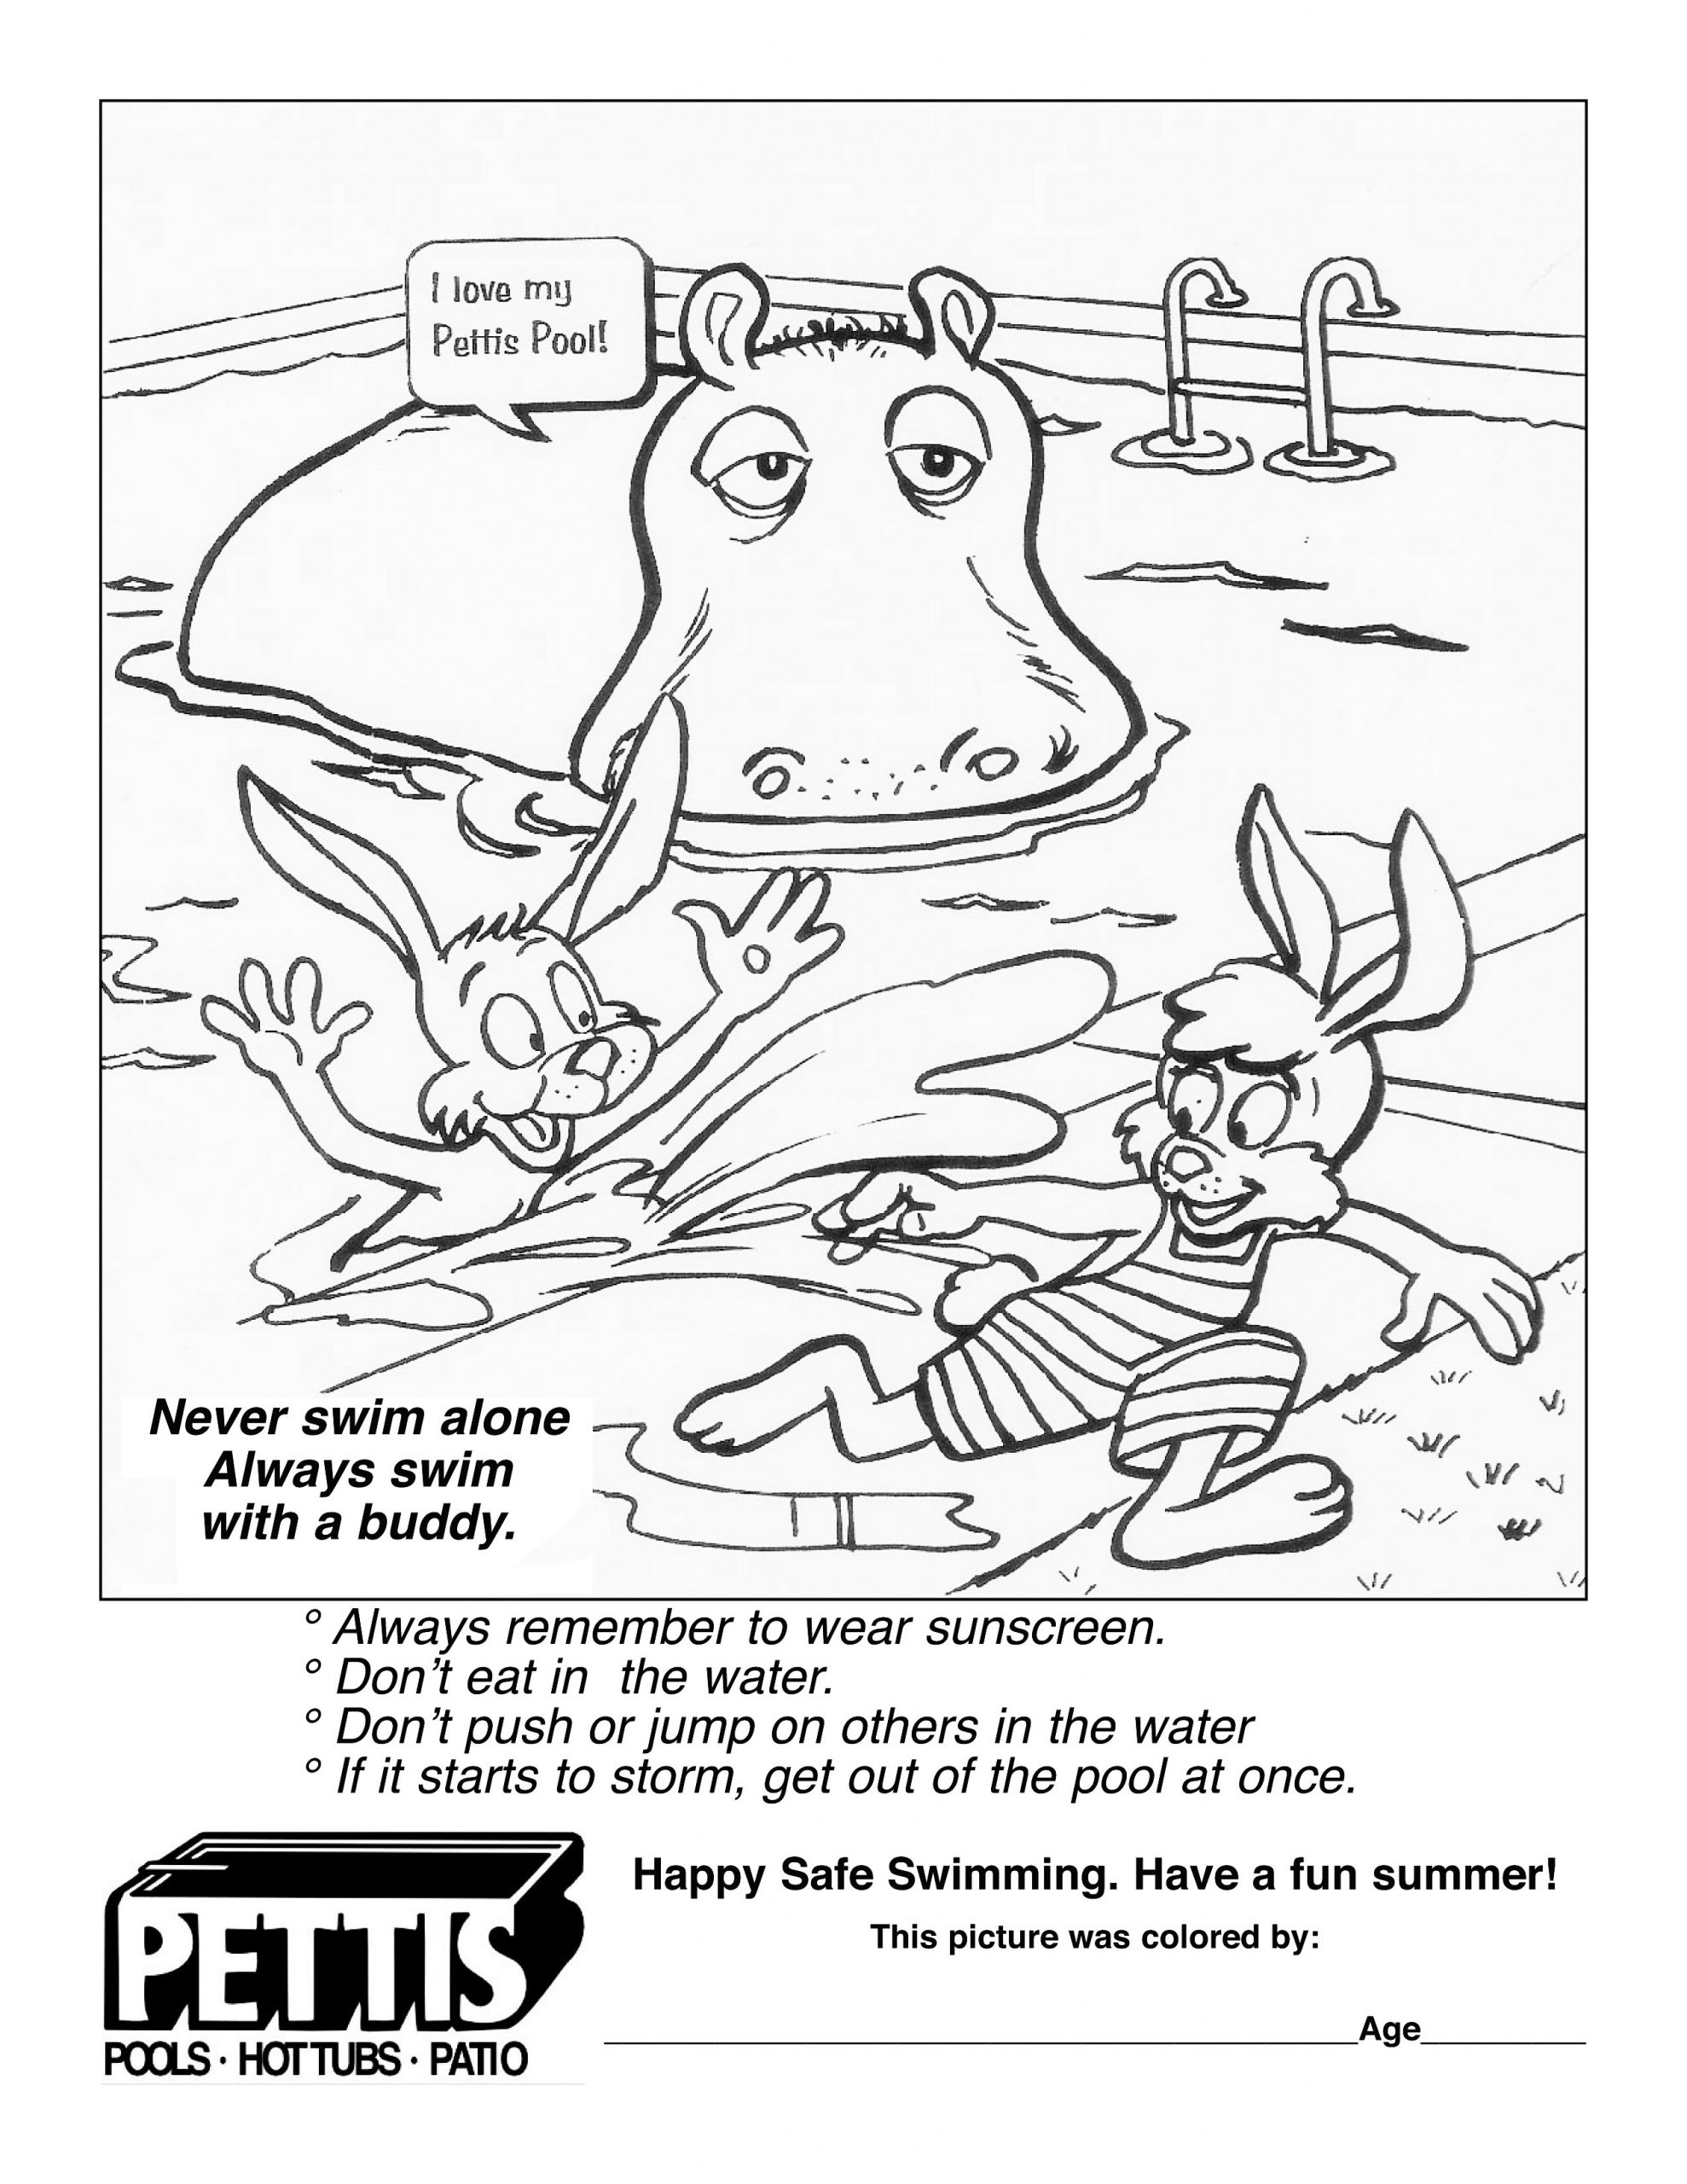 National water safety month coloring page